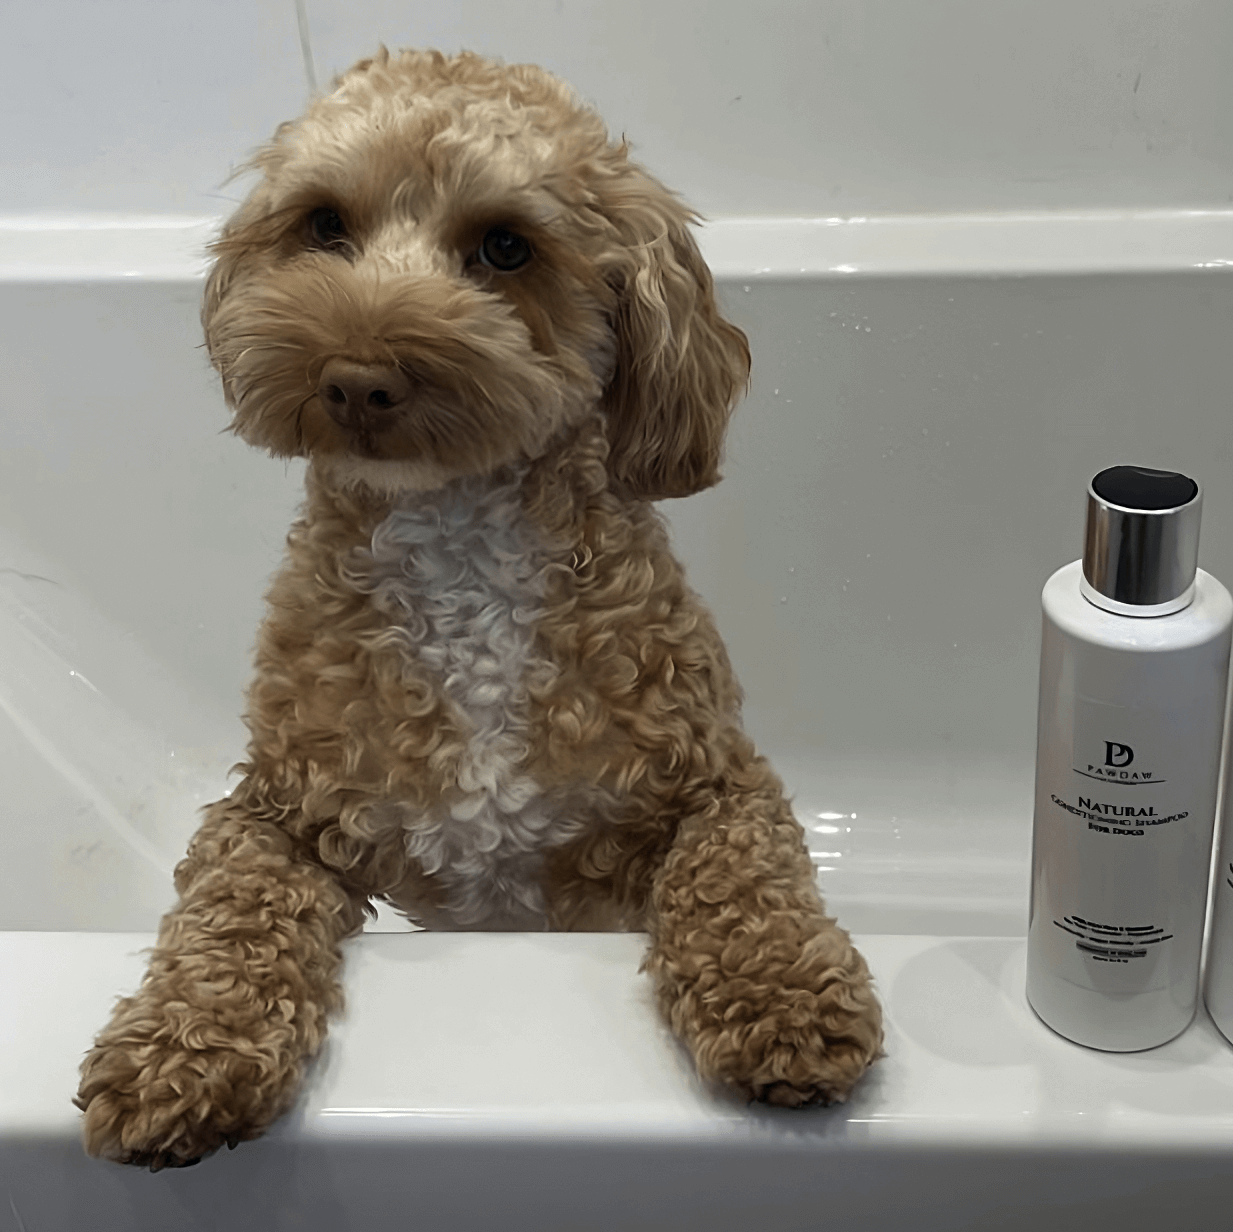 Dog in bath tub with Pawdaw of London Natural Conditioning Dog Shampoo